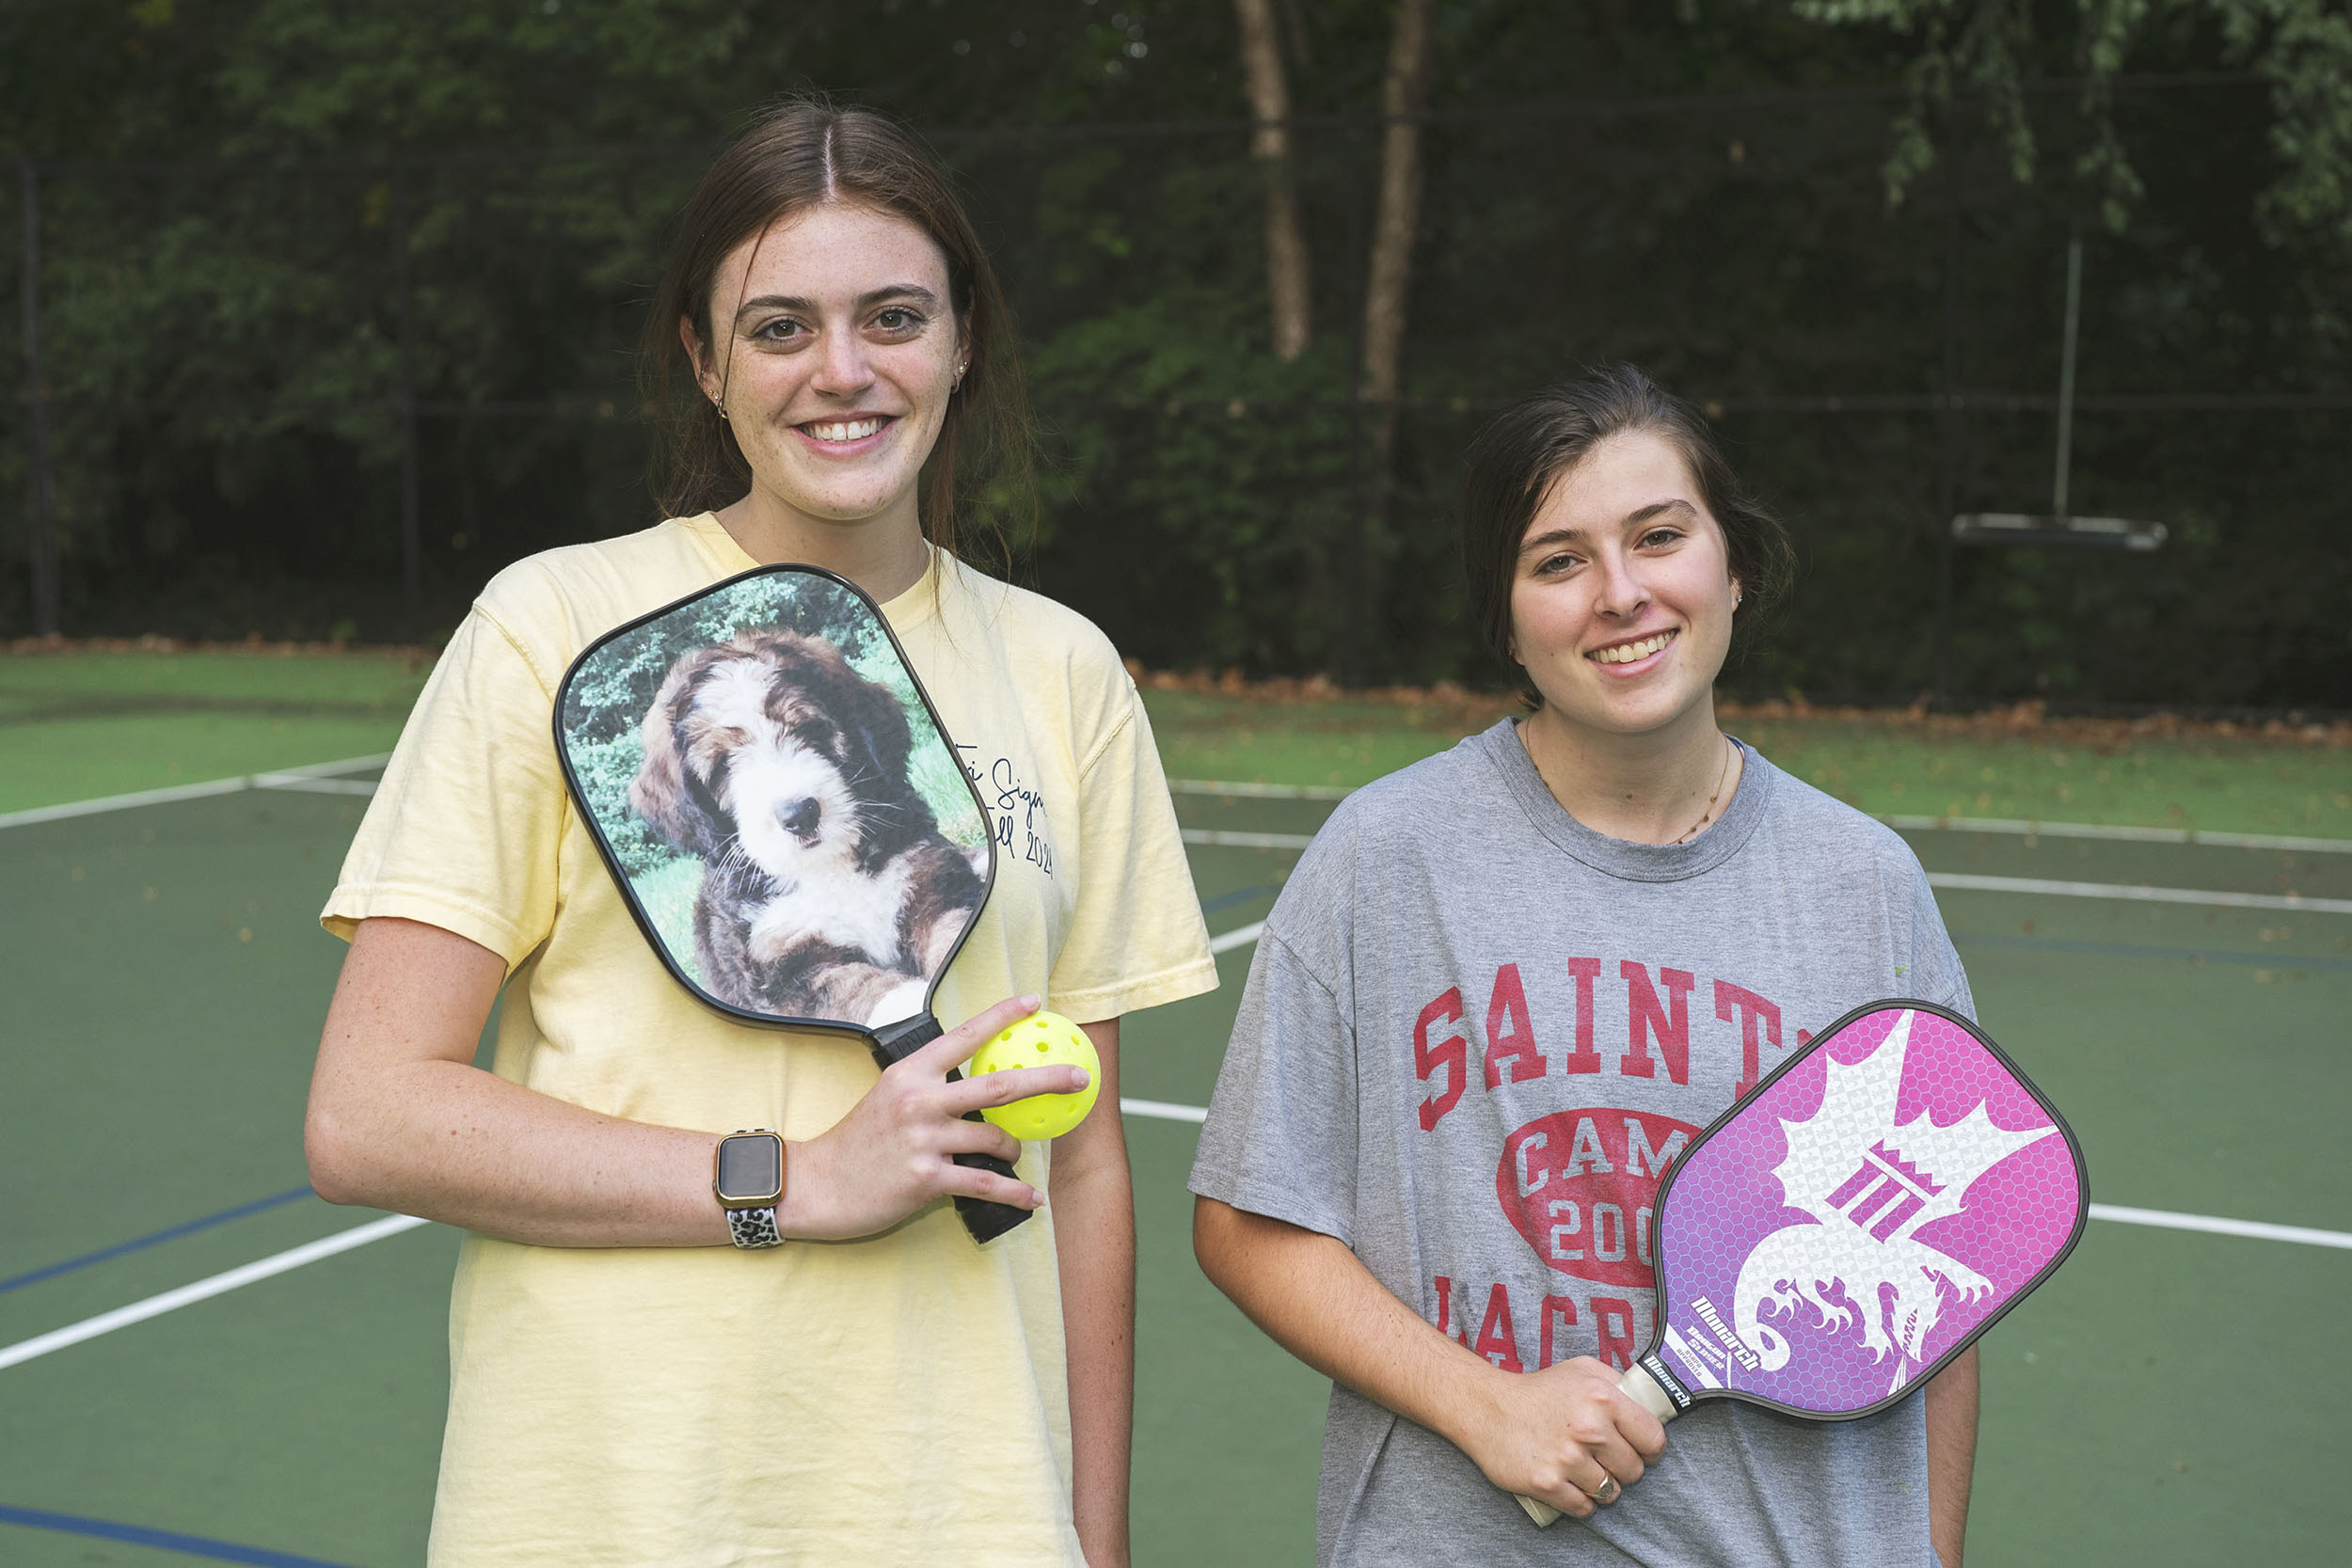 Delaney Stone, left, and Addie Wood, right, holding their pickleball paddles as they pose for a picture